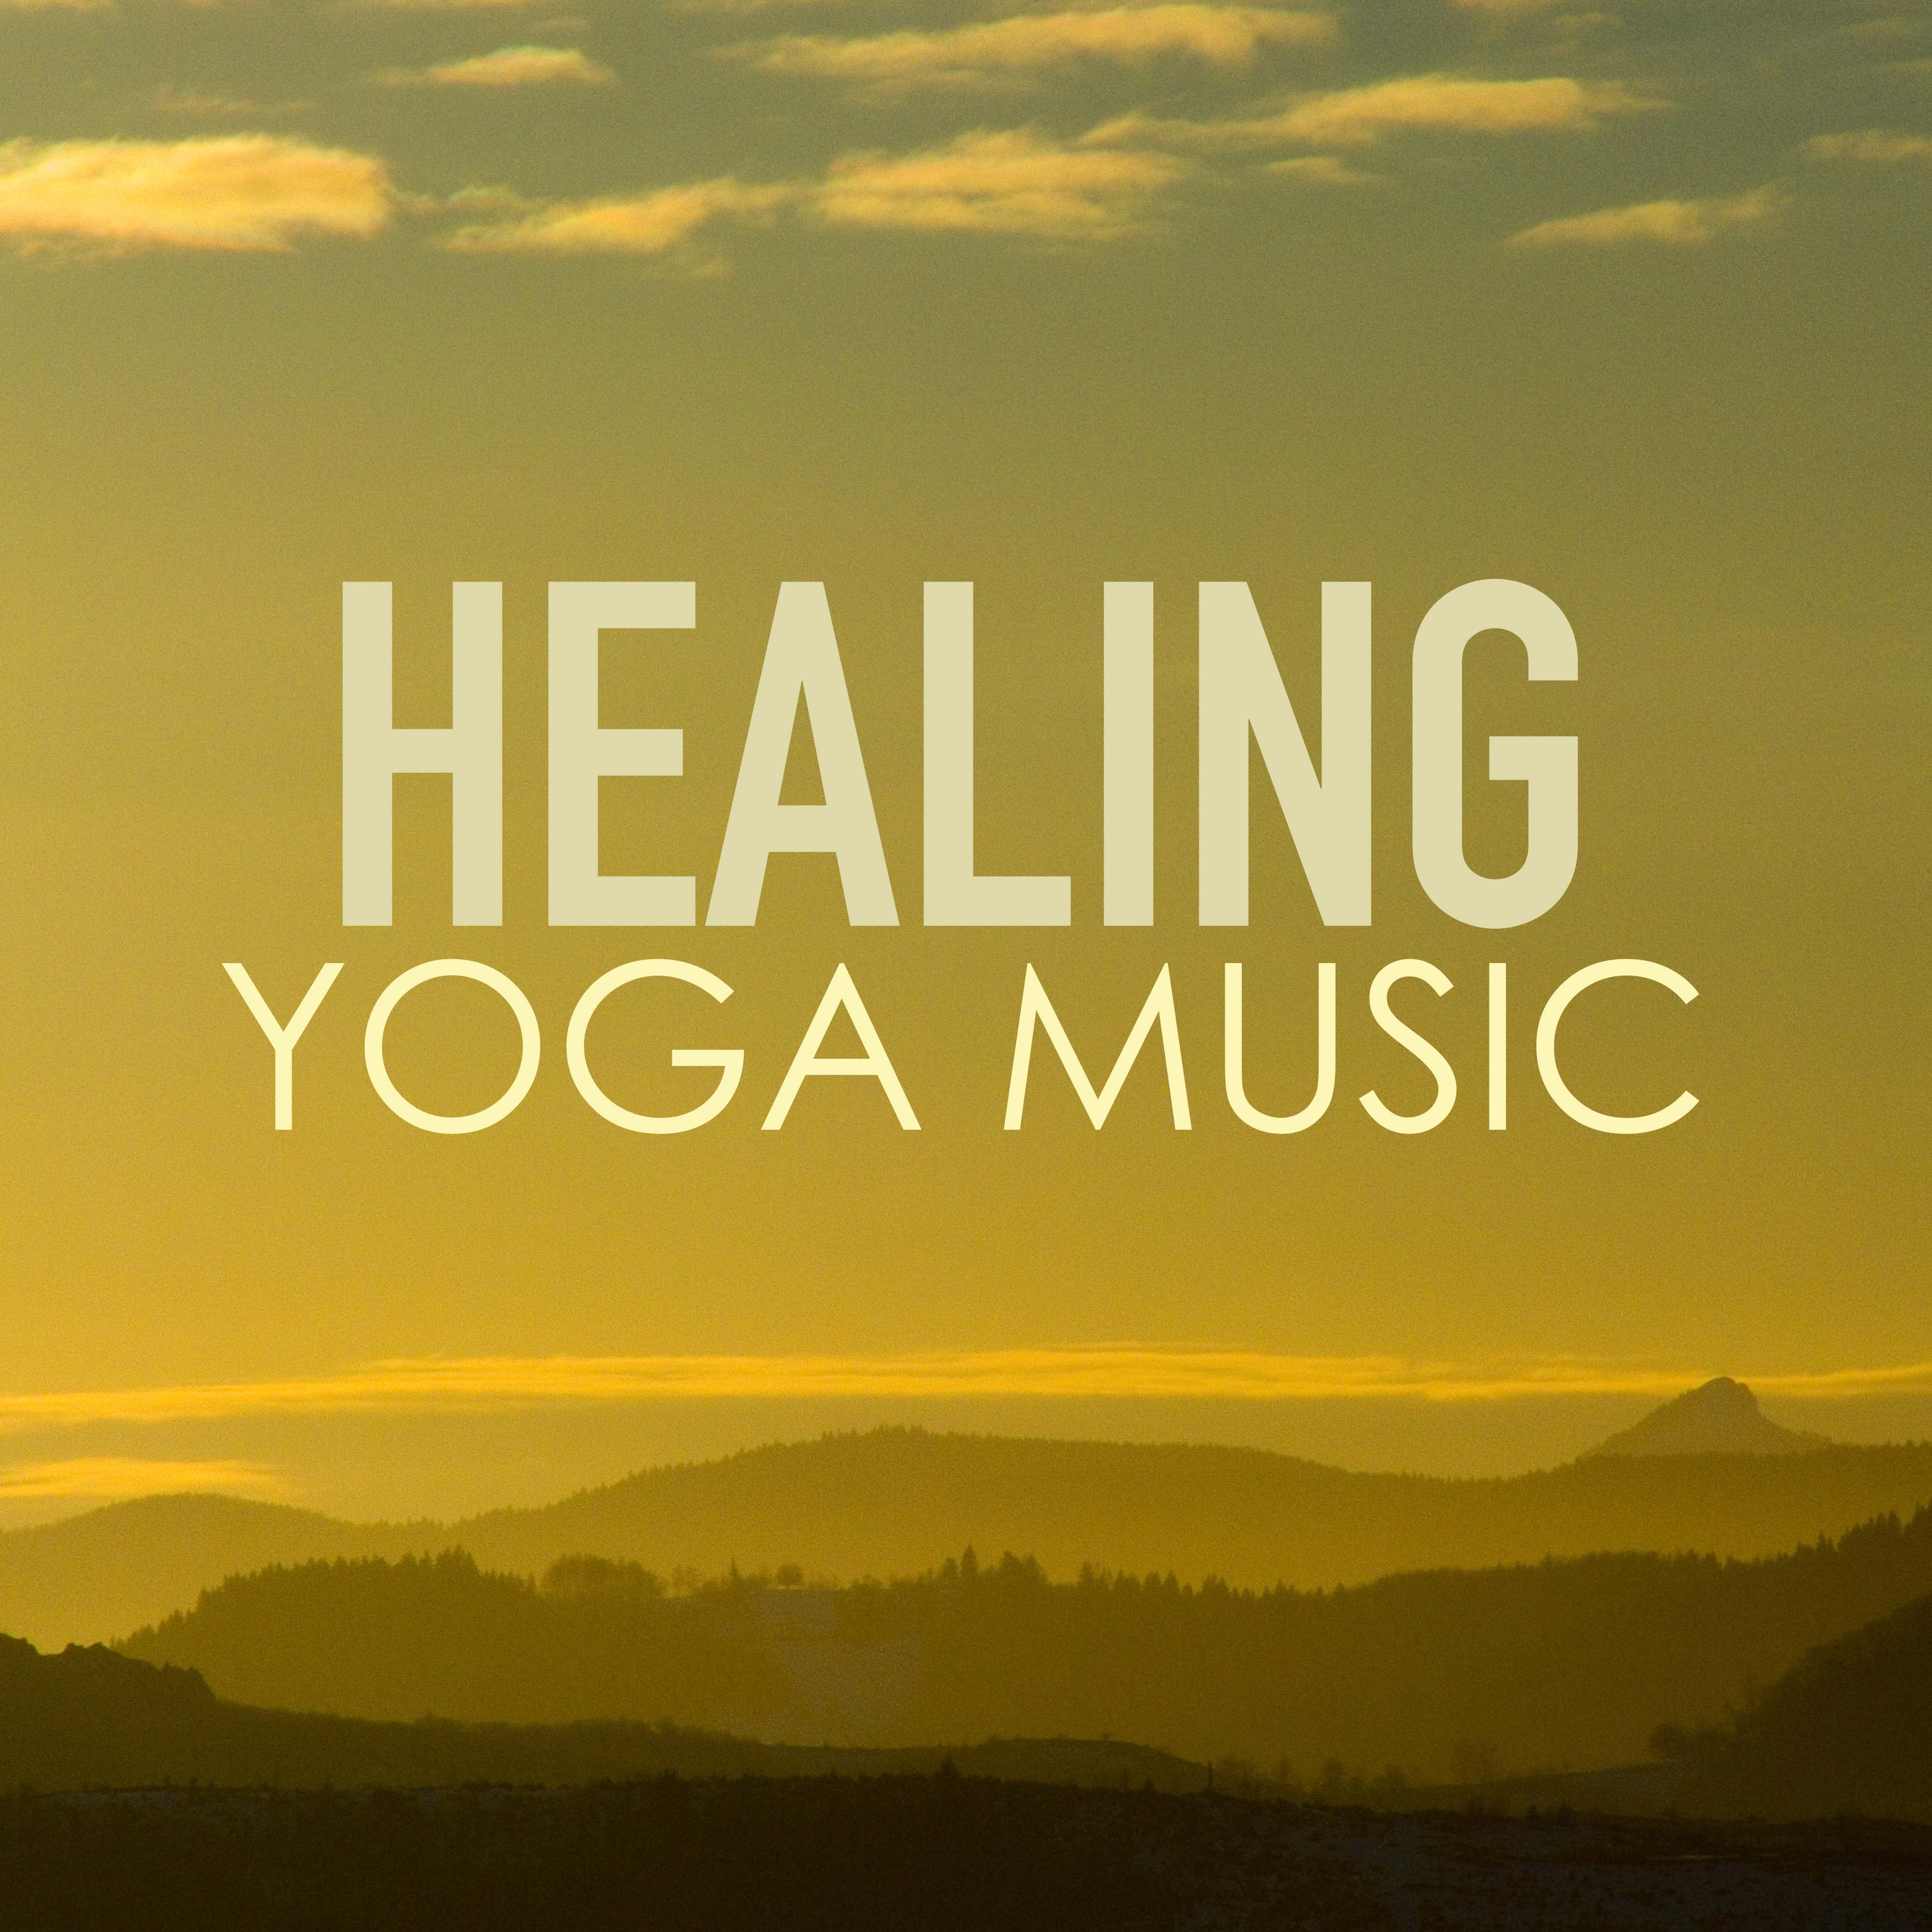 Healing Yoga Music for the Soul